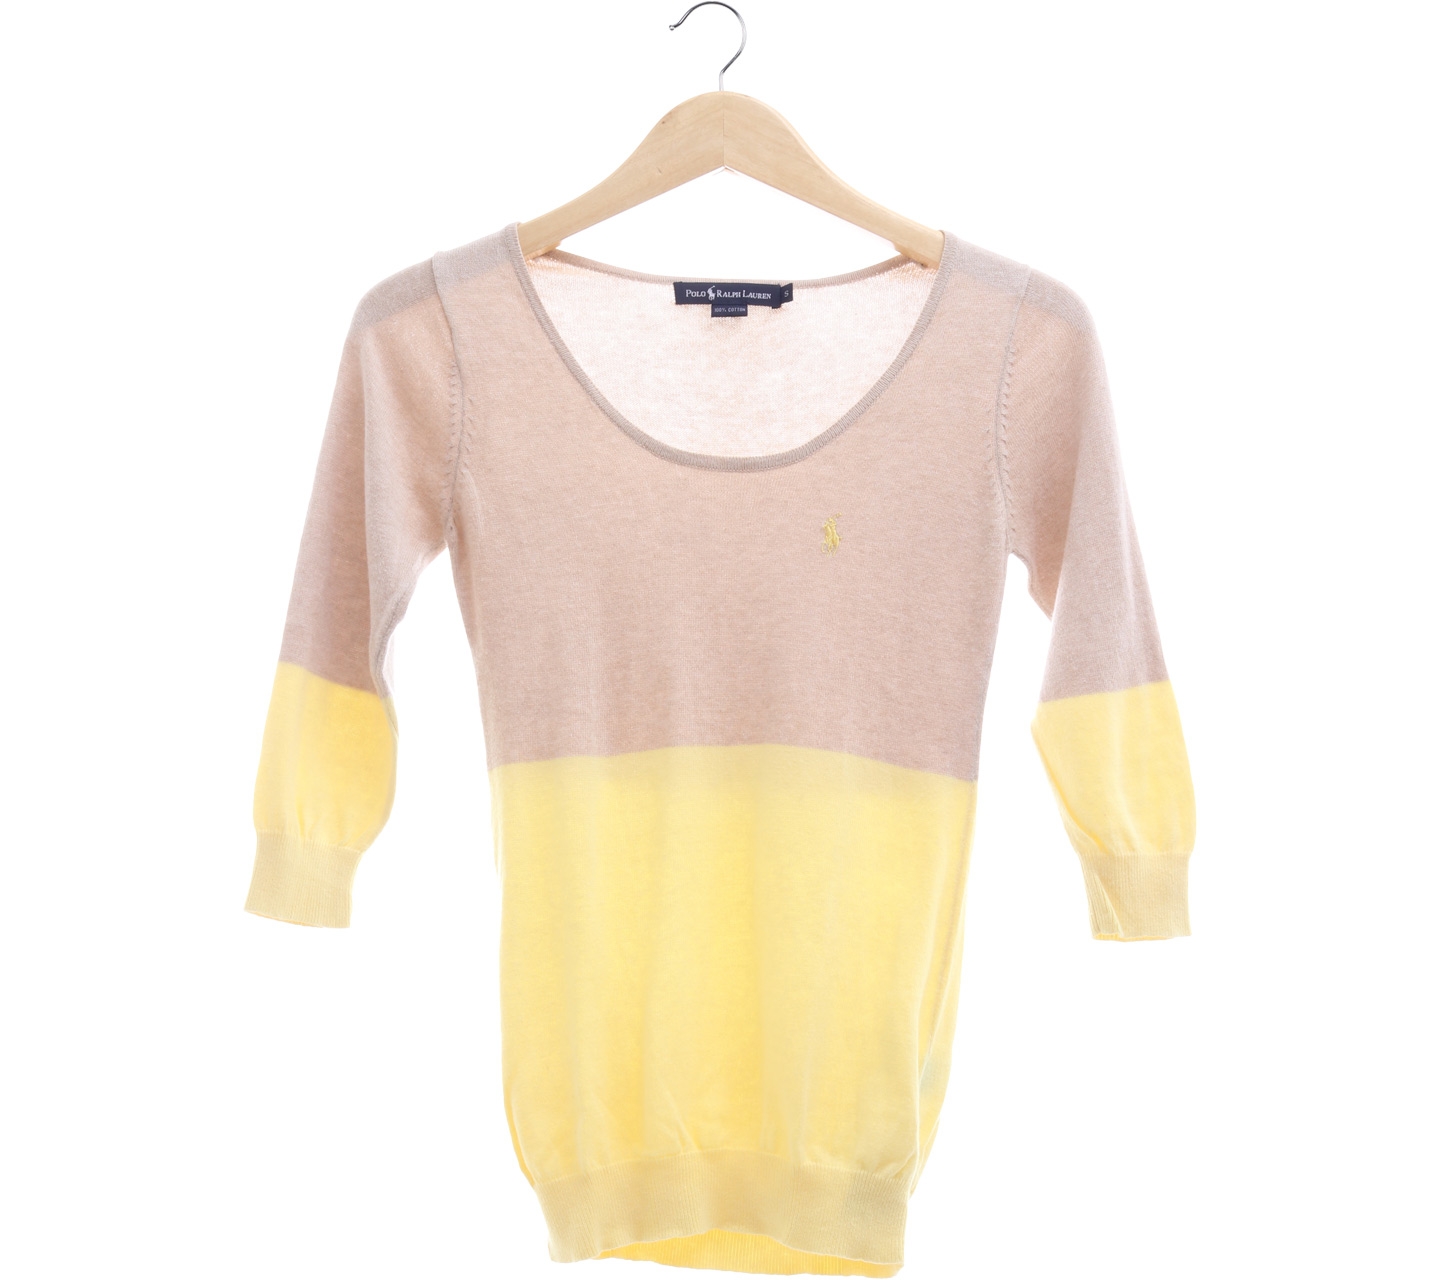 Polo Ralph Lauren Light Brown and Yellow Knit Sweater